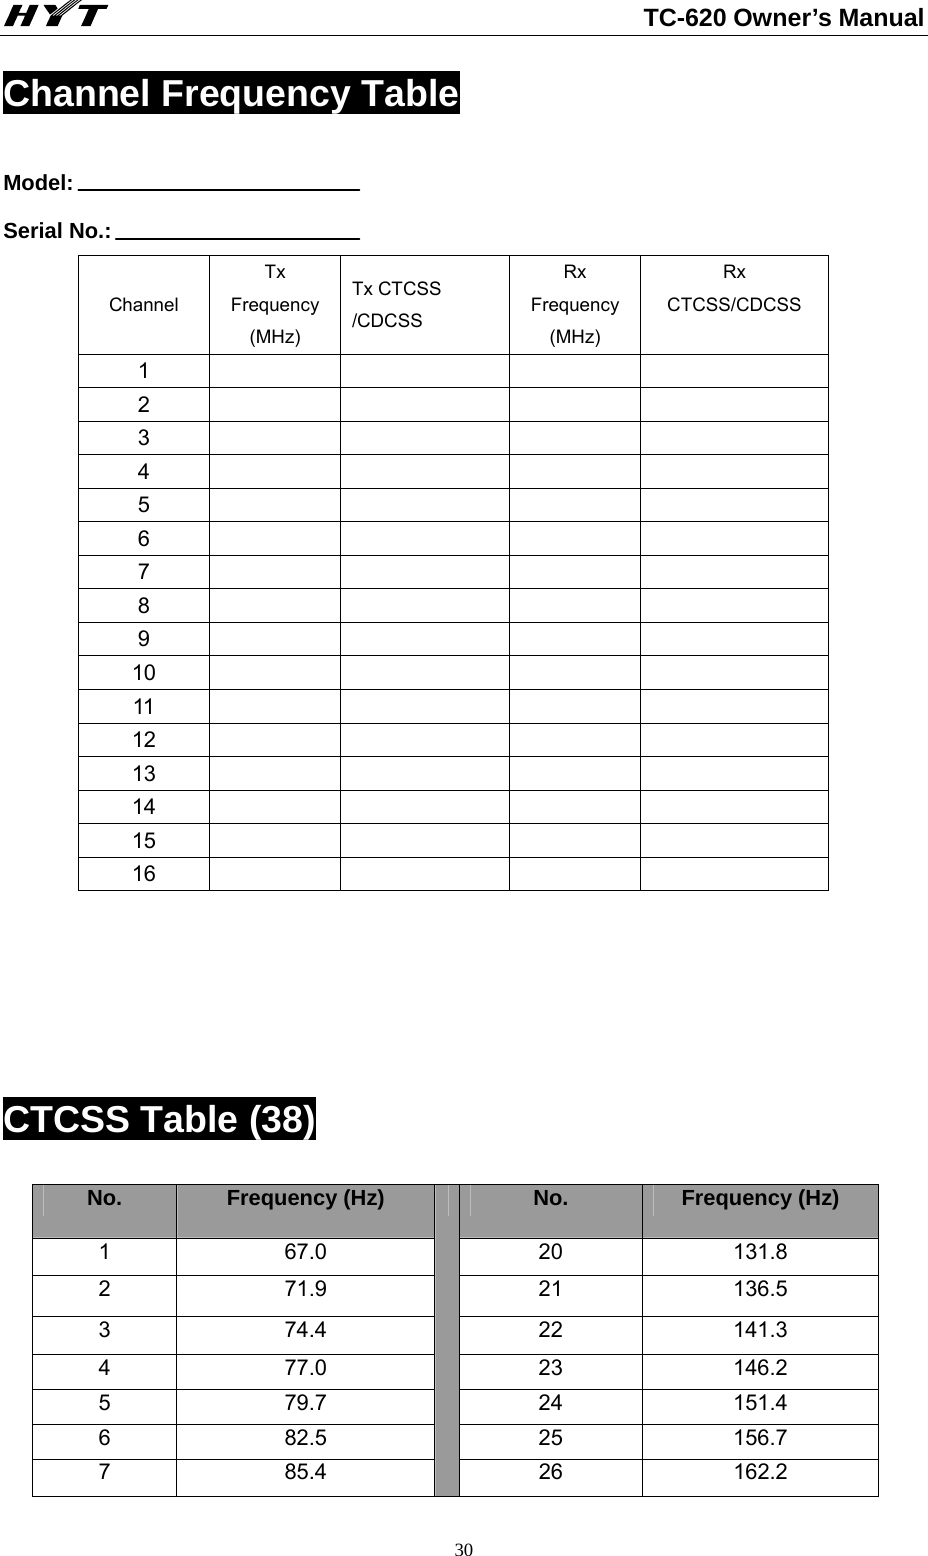                                                          TC-620 Owner’s Manual  30Channel Frequency Table Model: Serial No.: Channel Tx Frequency (MHz) Tx CTCSS /CDCSS Rx Frequency (MHz) Rx  CTCSS/CDCSS 1      2      3      4      5      6      7      8      9      10      11      12      13      14      15      16        CTCSS Table (38) No.  Frequency (Hz)  No.  Frequency (Hz) 1 67.0  20 131.8 2 71.9  21 136.5 3 74.4  22 141.3 4 77.0  23 146.2 5 79.7  24 151.4 6 82.5  25 156.7 7 85.4  26 162.2 